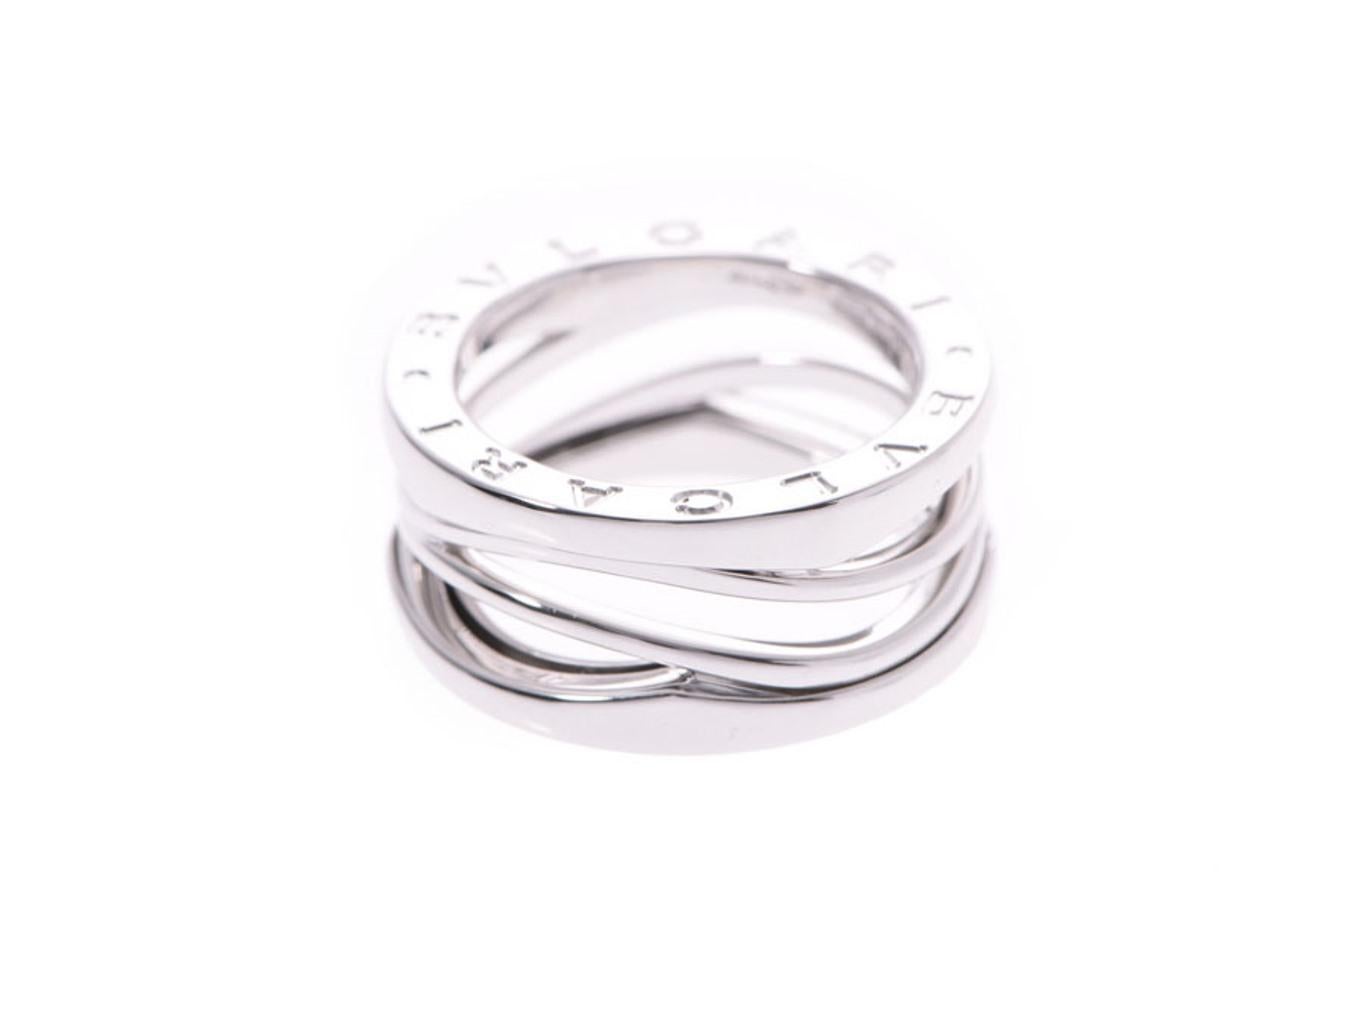 Nail the new-season fashion-forward look with this classy Bvlgari ring. Showcasing an elegant design, this 18k white gold ring is characterized by beautiful curves and a smooth finish. An impeccable complement to your look, this striking ring is a